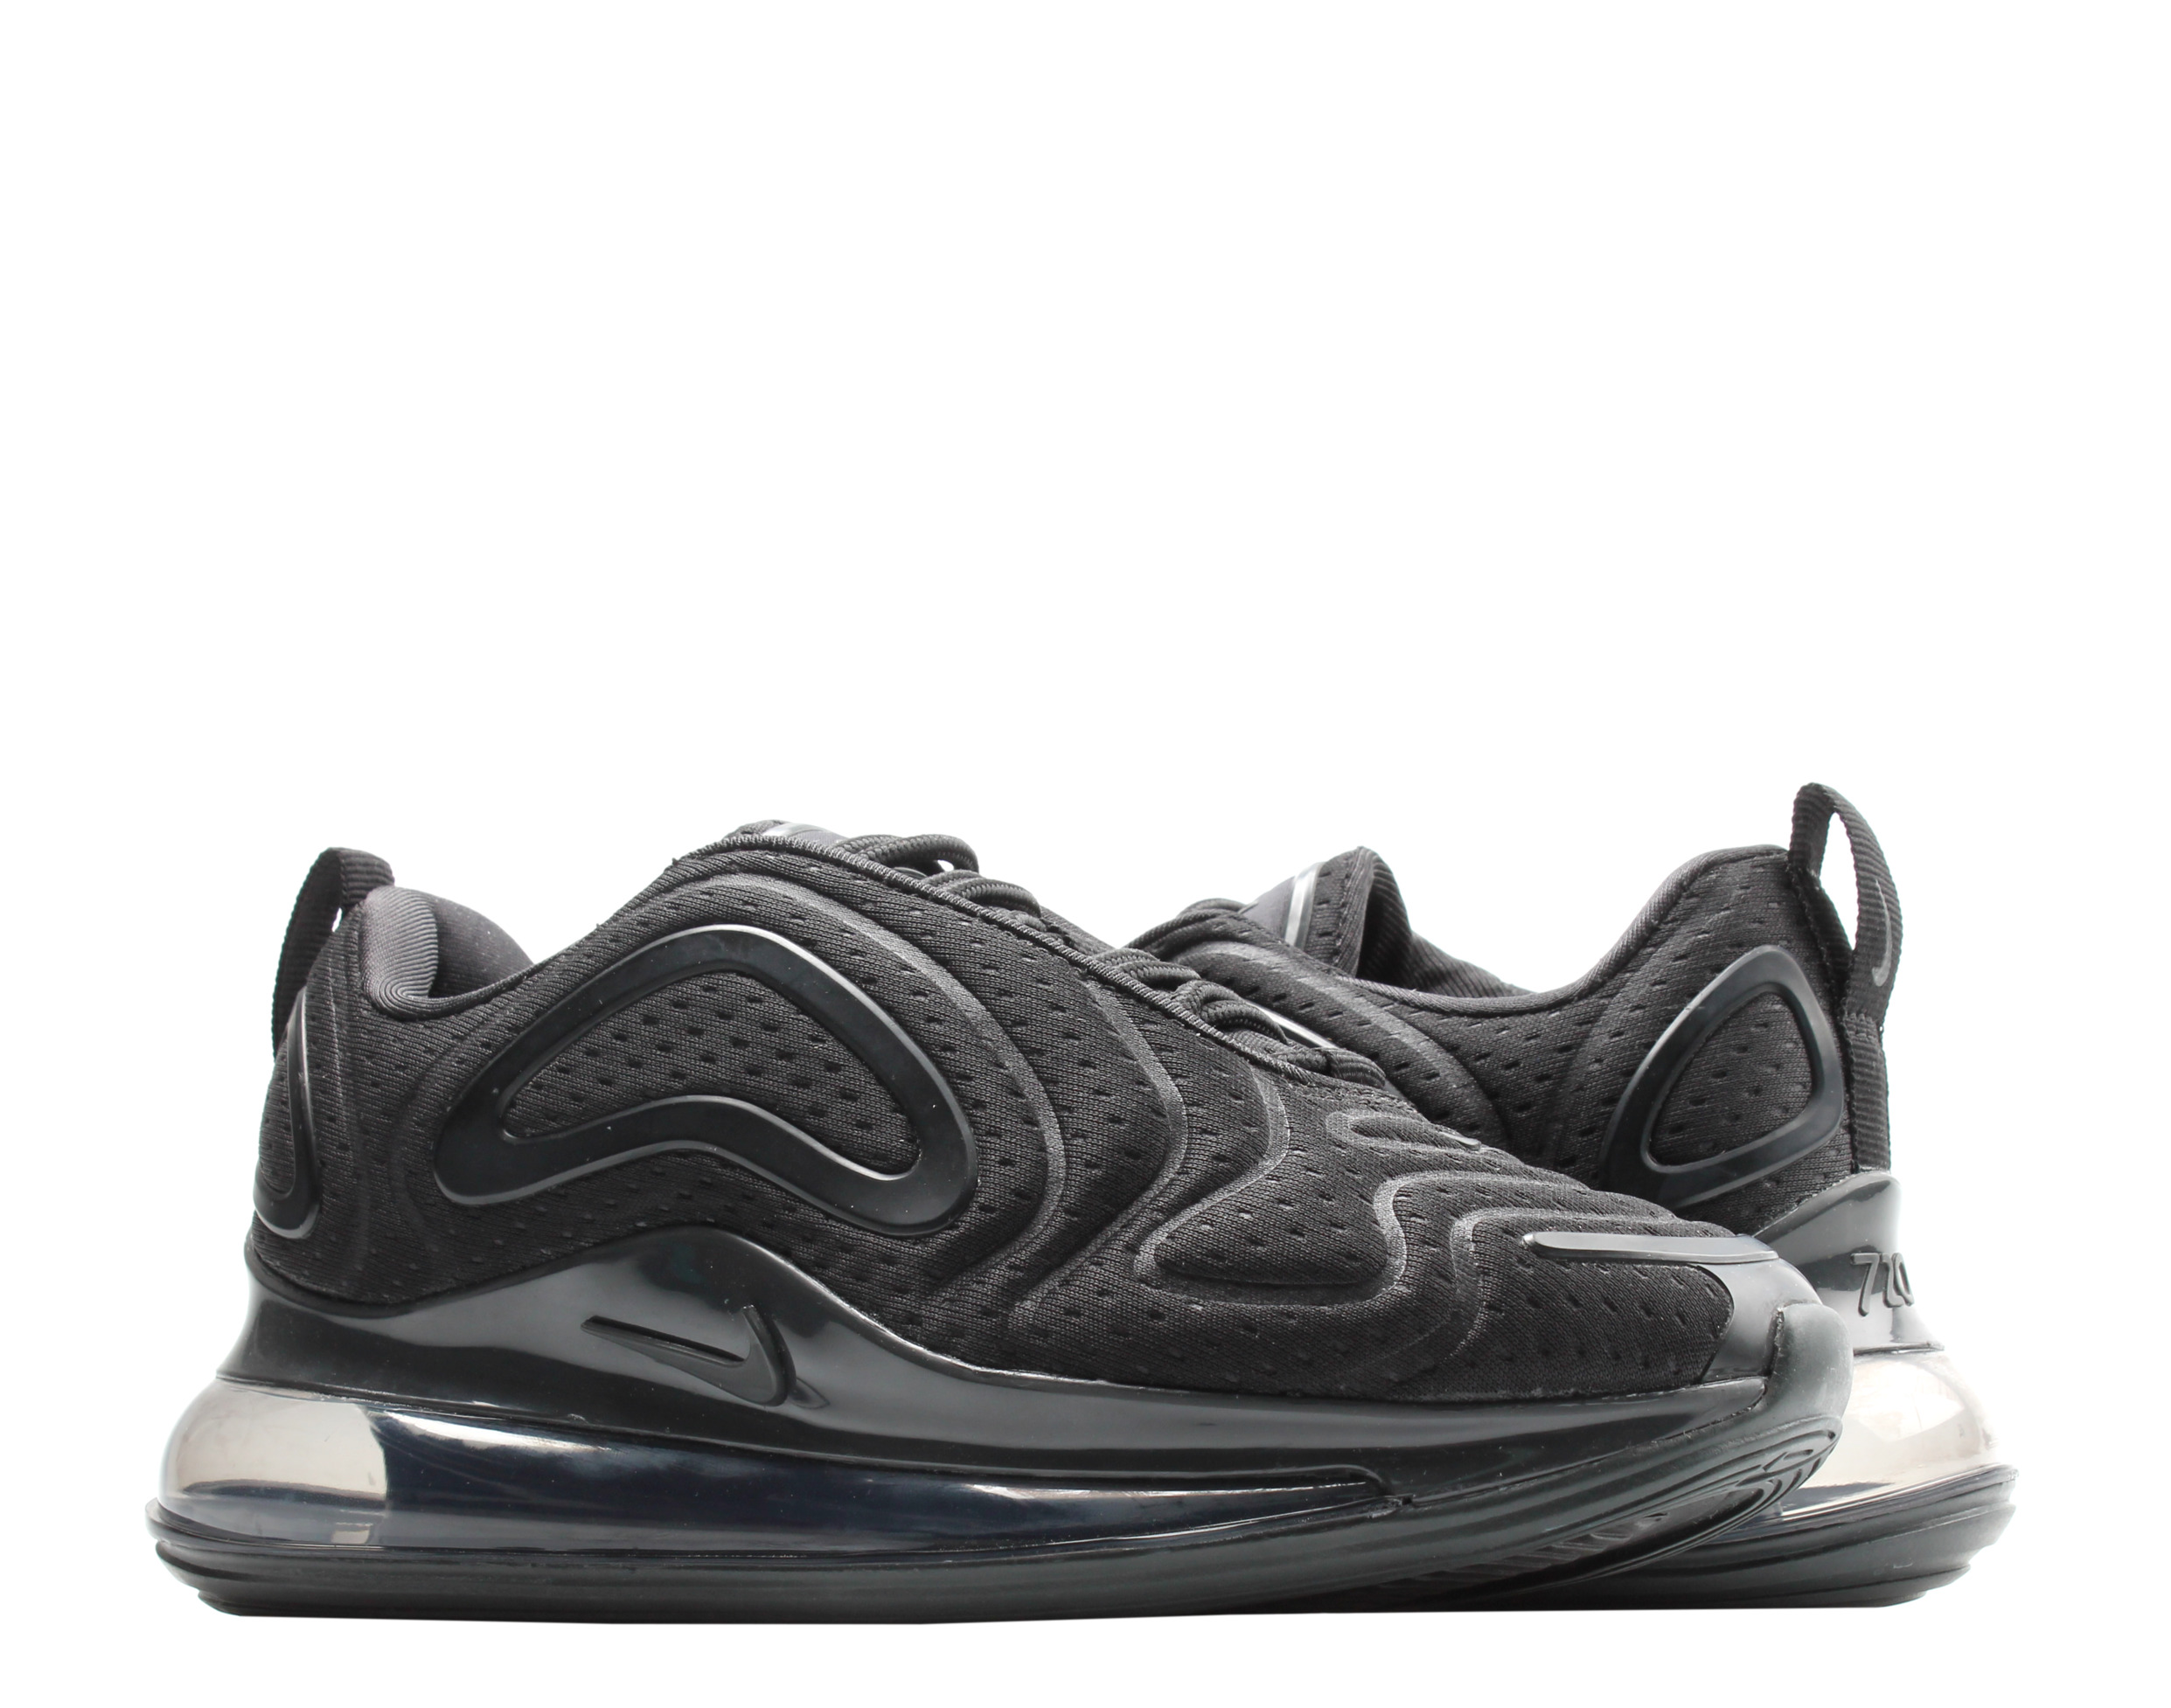 Nike Air Max 720 Women's Running Shoes Size 8 - image 1 of 6